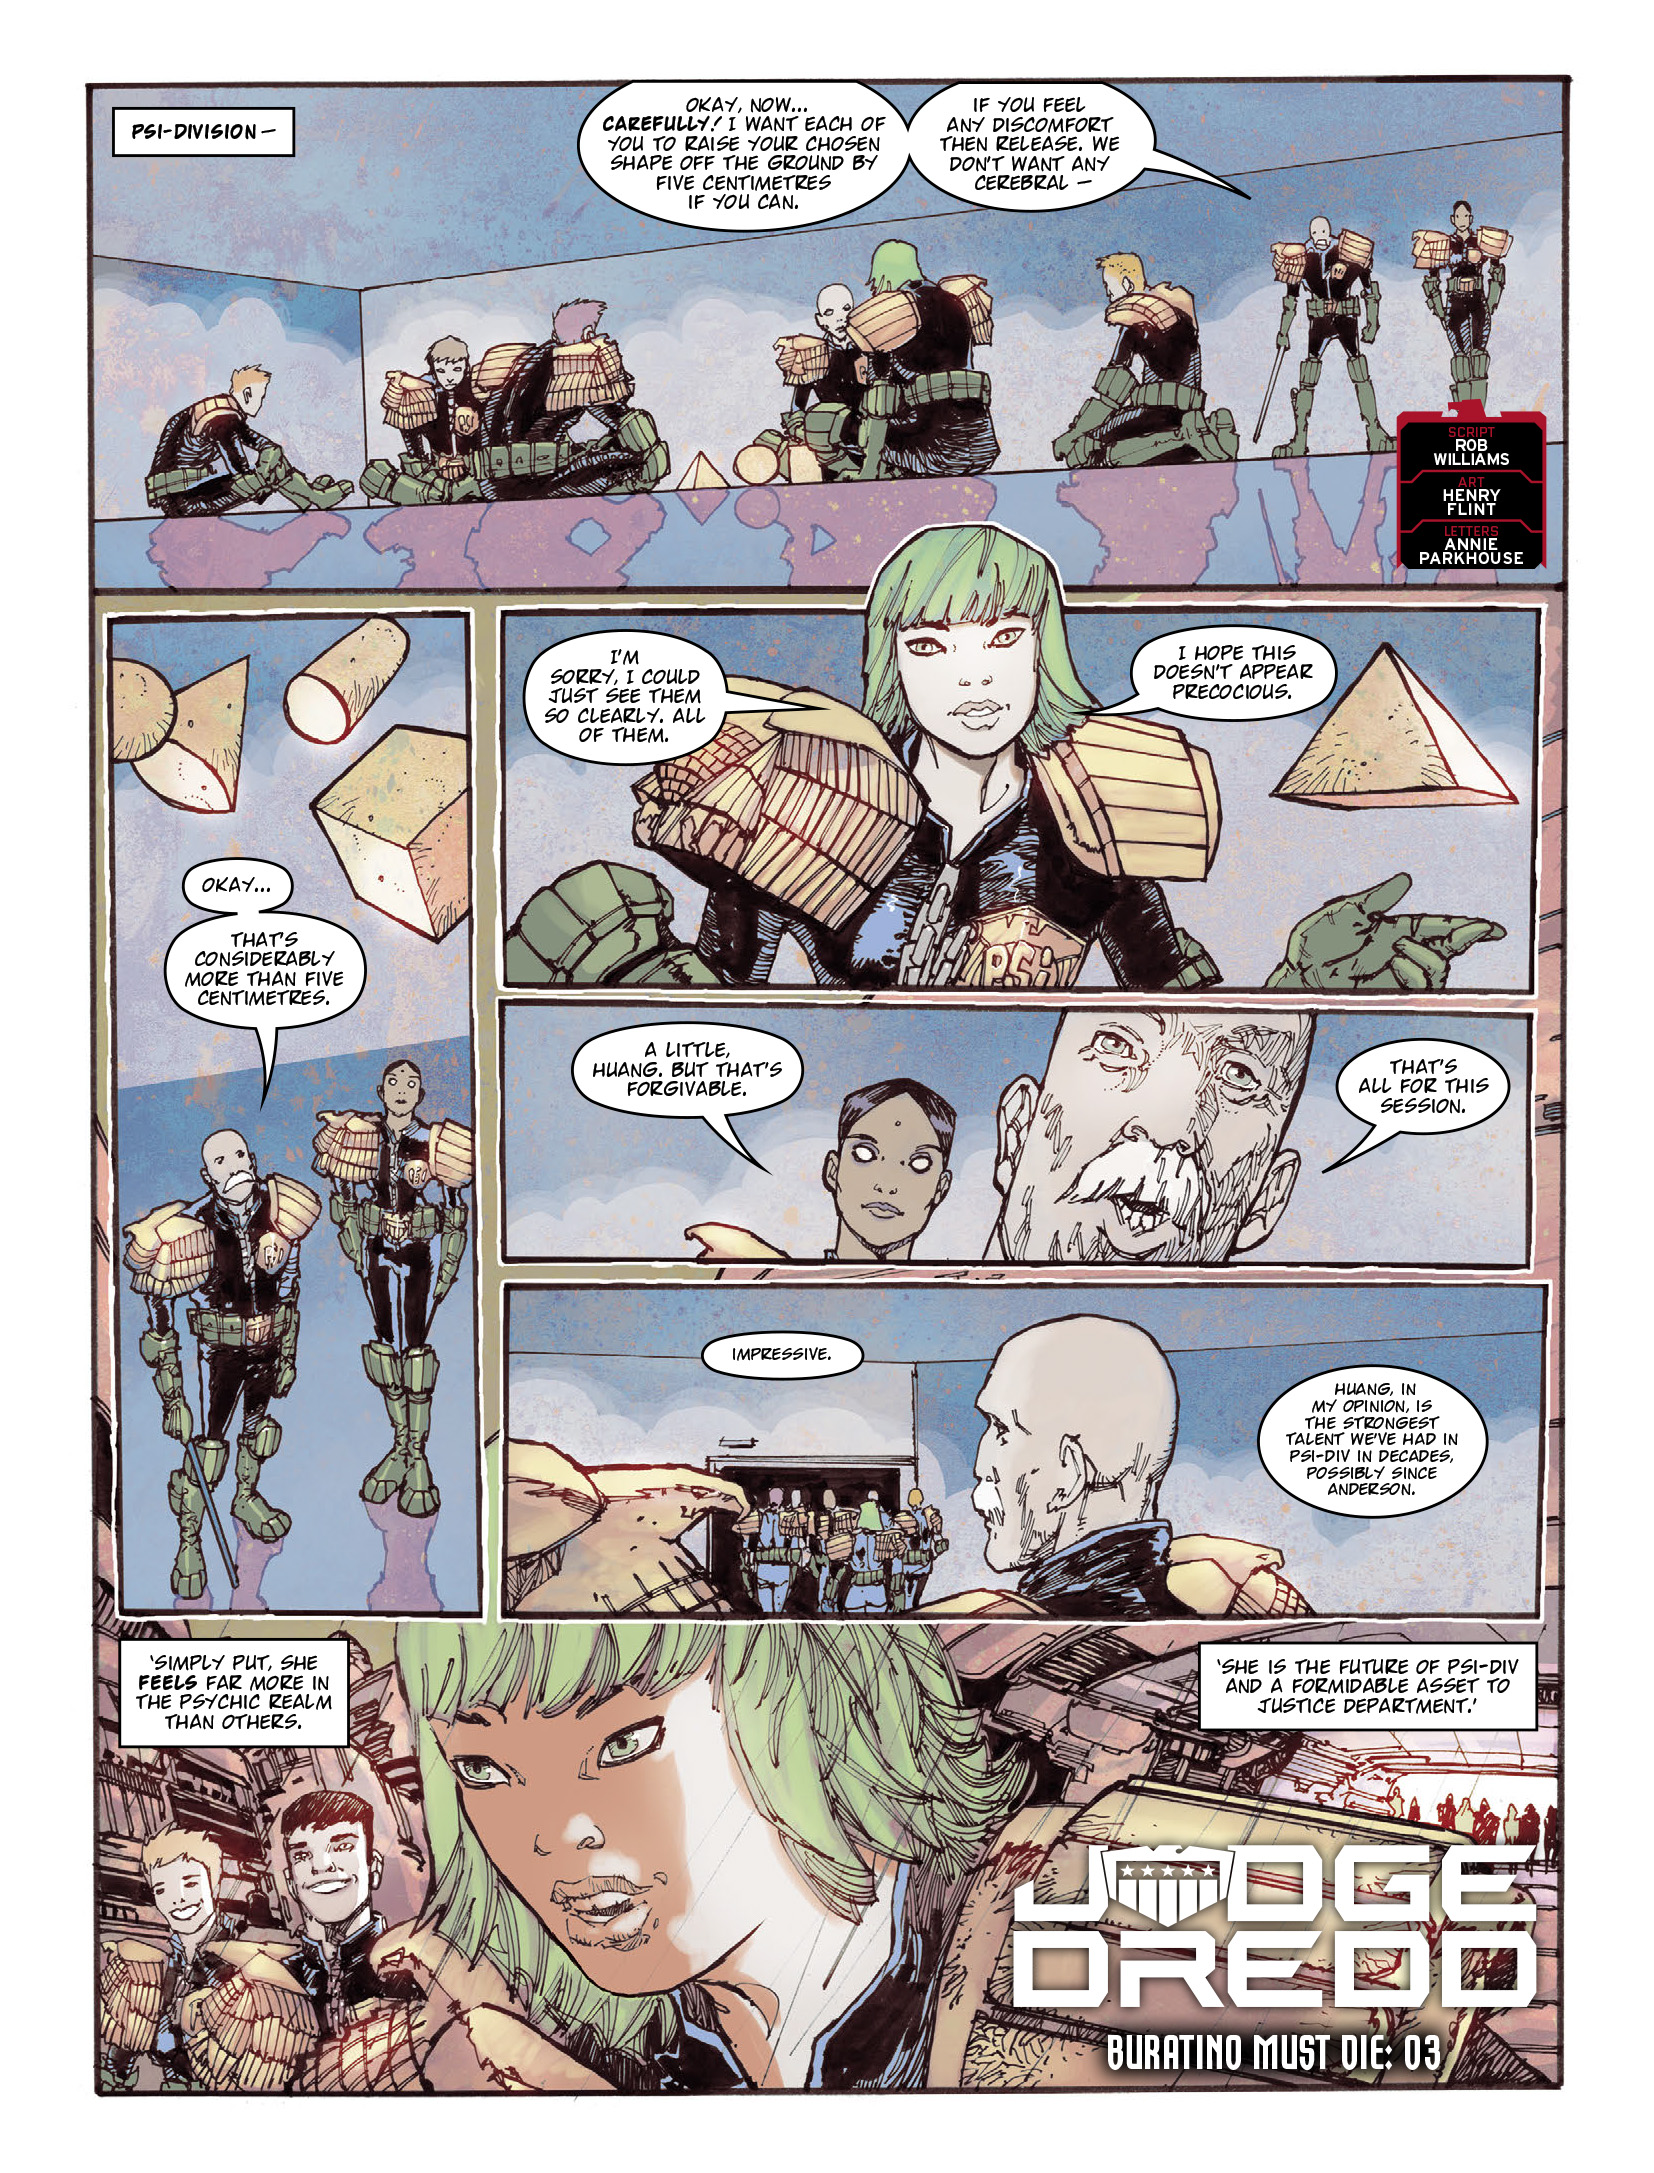 2000 AD: Chapter 2305 - Page 3